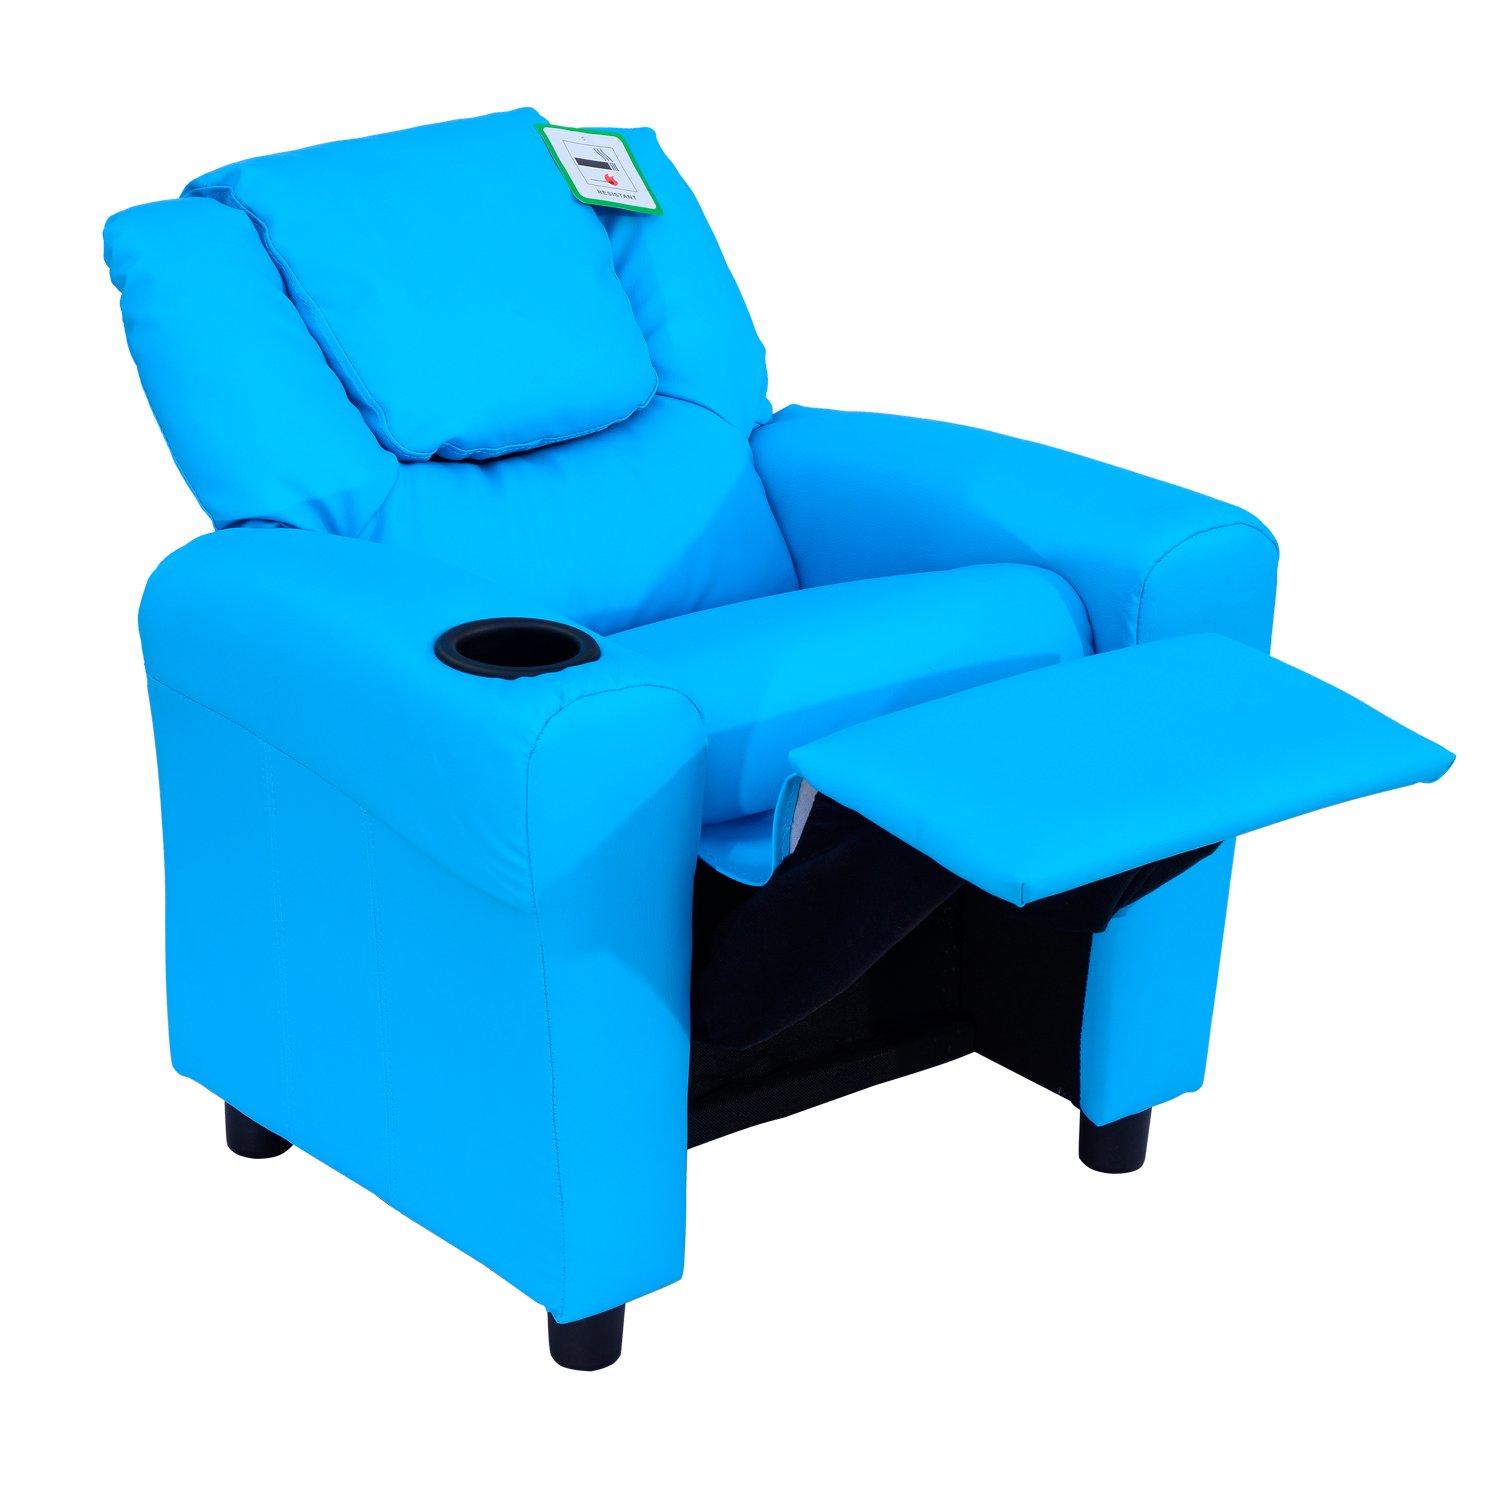 Recliner Armchair Games Chair Sofa Childrens Seat In PU Leather